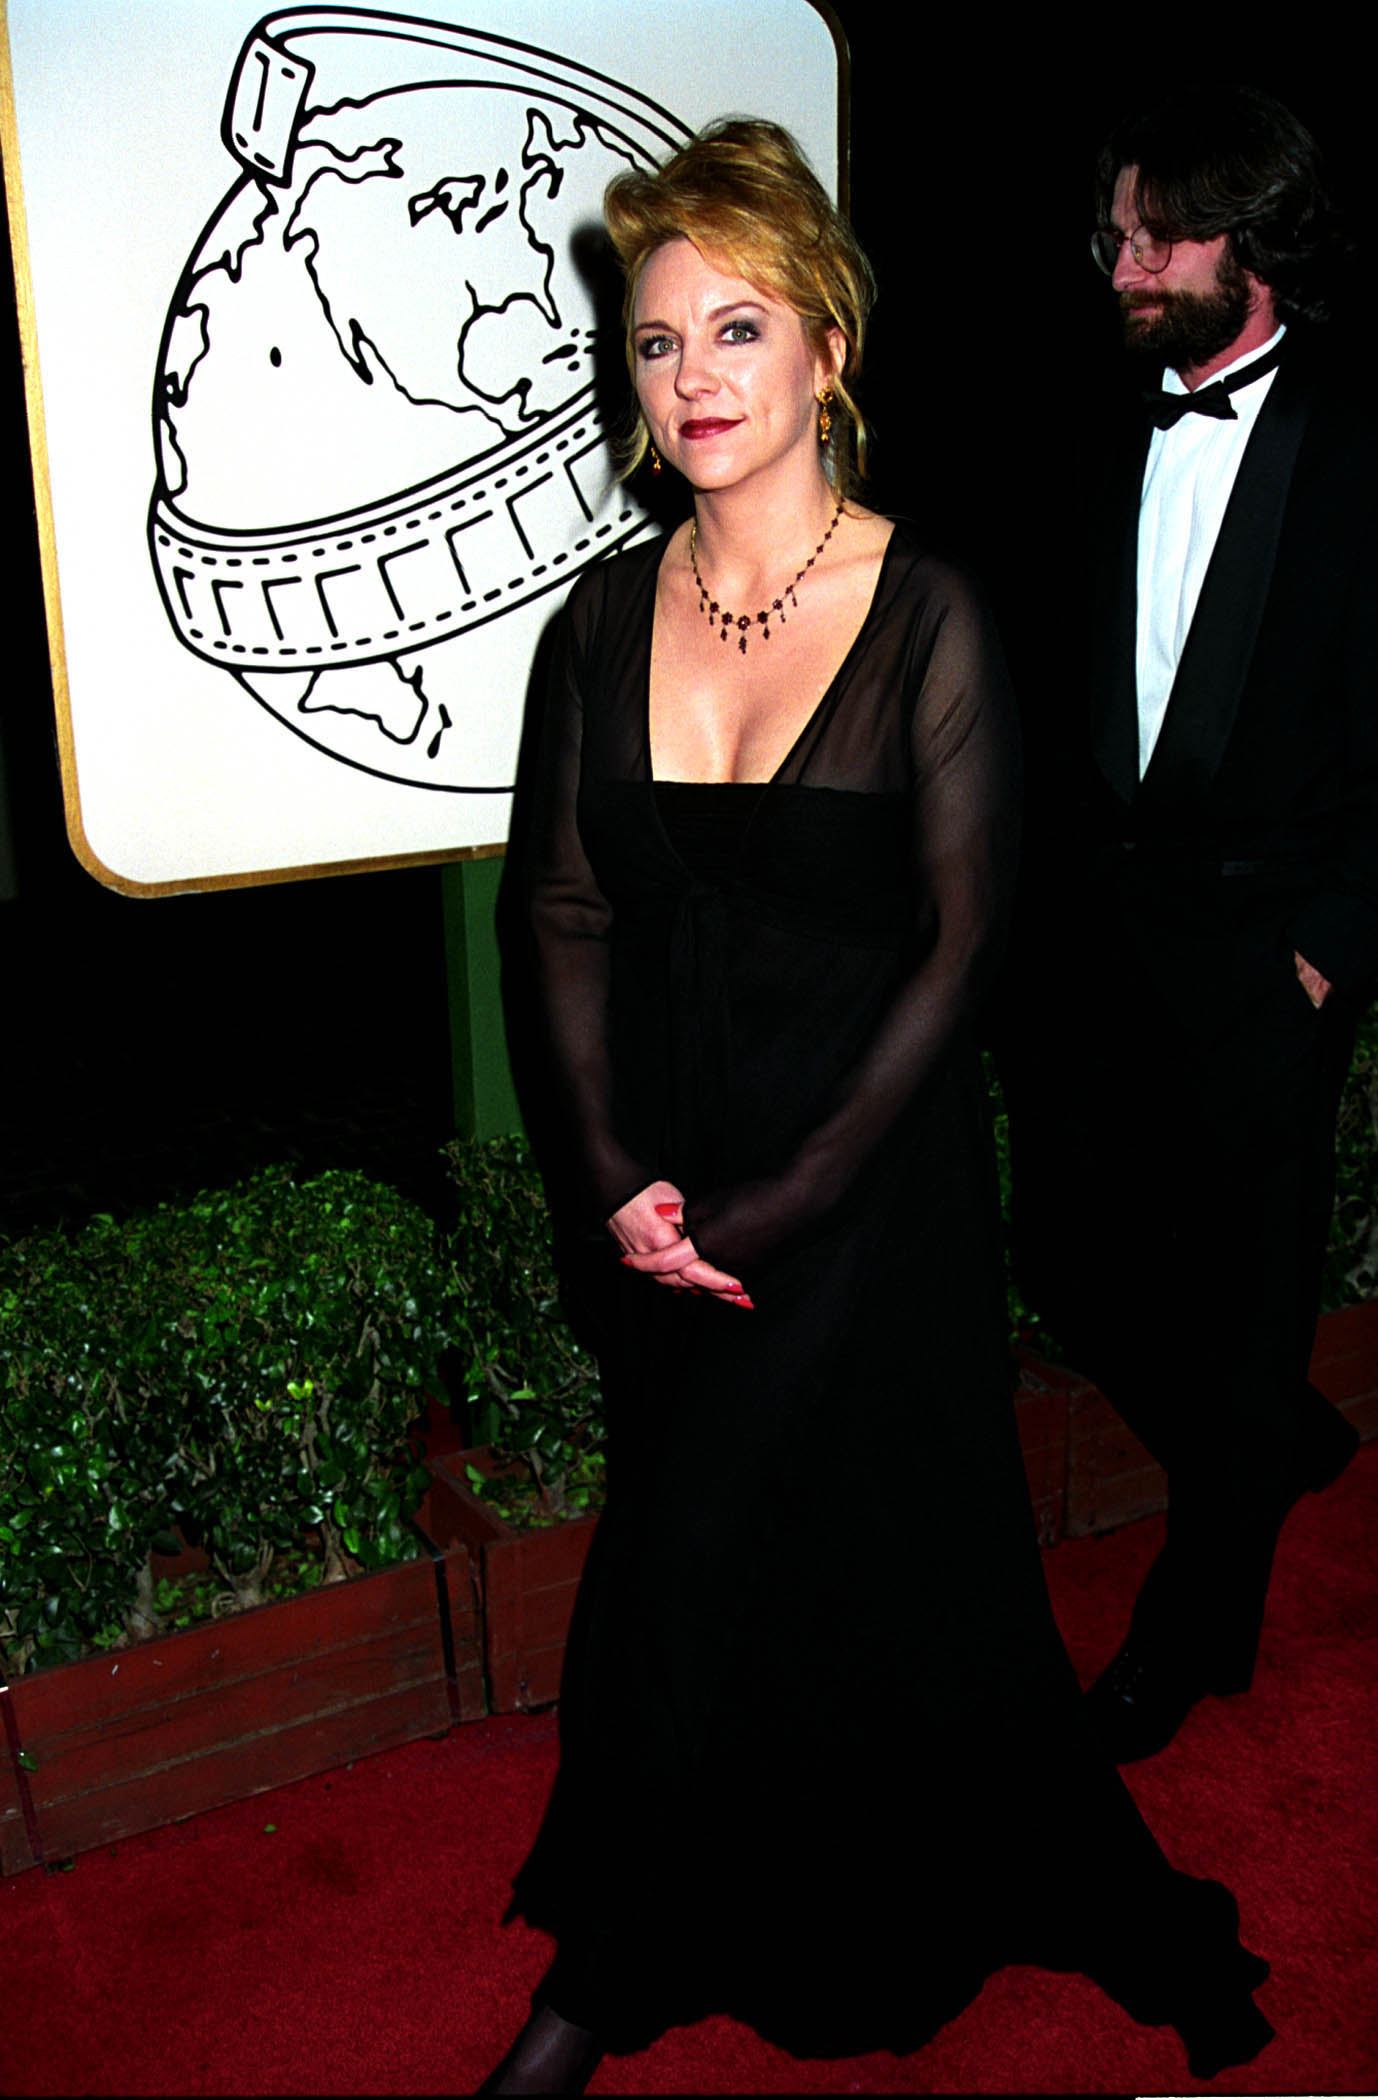 Brett Butler during the Golden Globe Awards in Los Angeles, California, in 1995 | Source: Getty Images